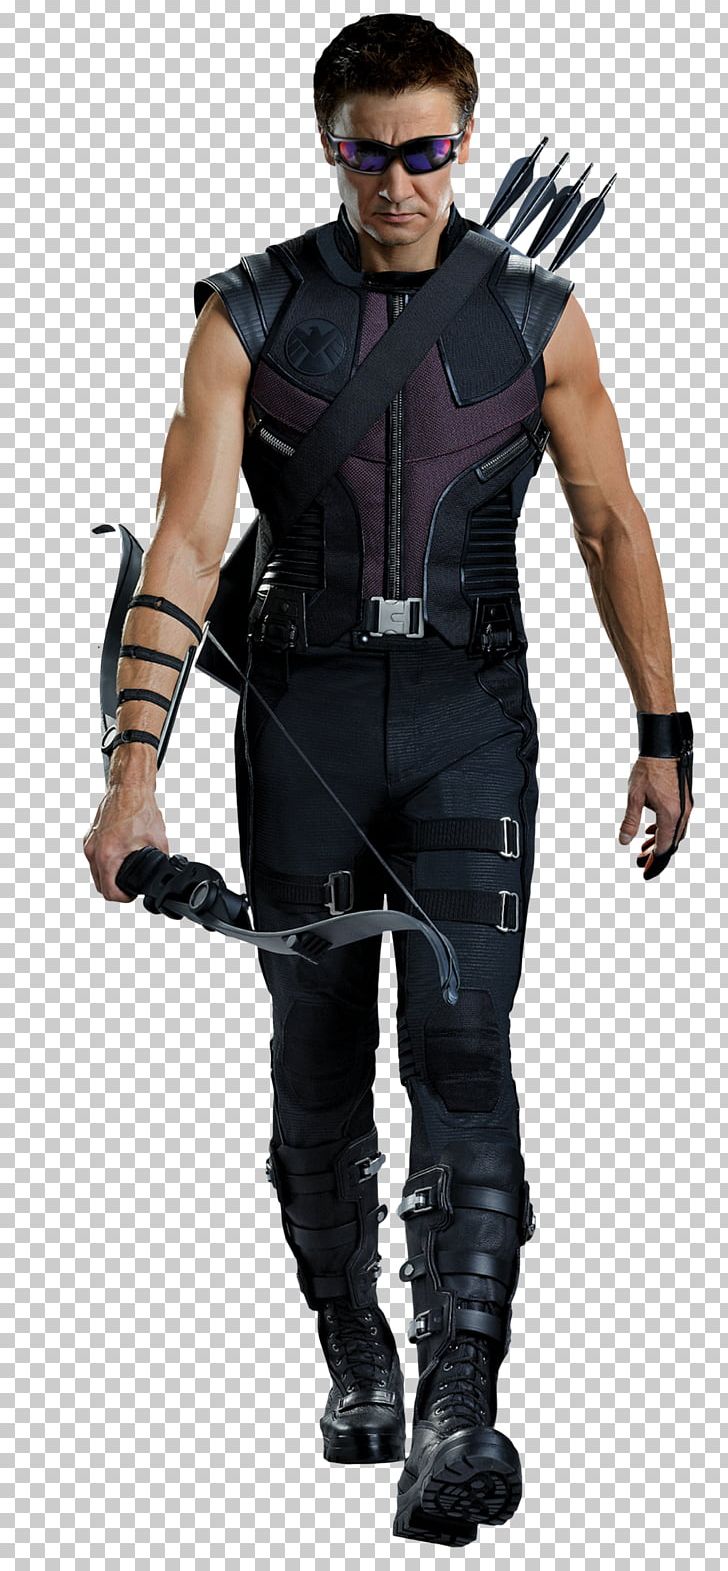 Jeremy Renner Clint Barton Black Widow Captain America Avengers: Age Of Ultron PNG, Clipart, Avengers, Avengers Age Of Ultron, Avengers Infinity War, Black Widow, Captain America Free PNG Download